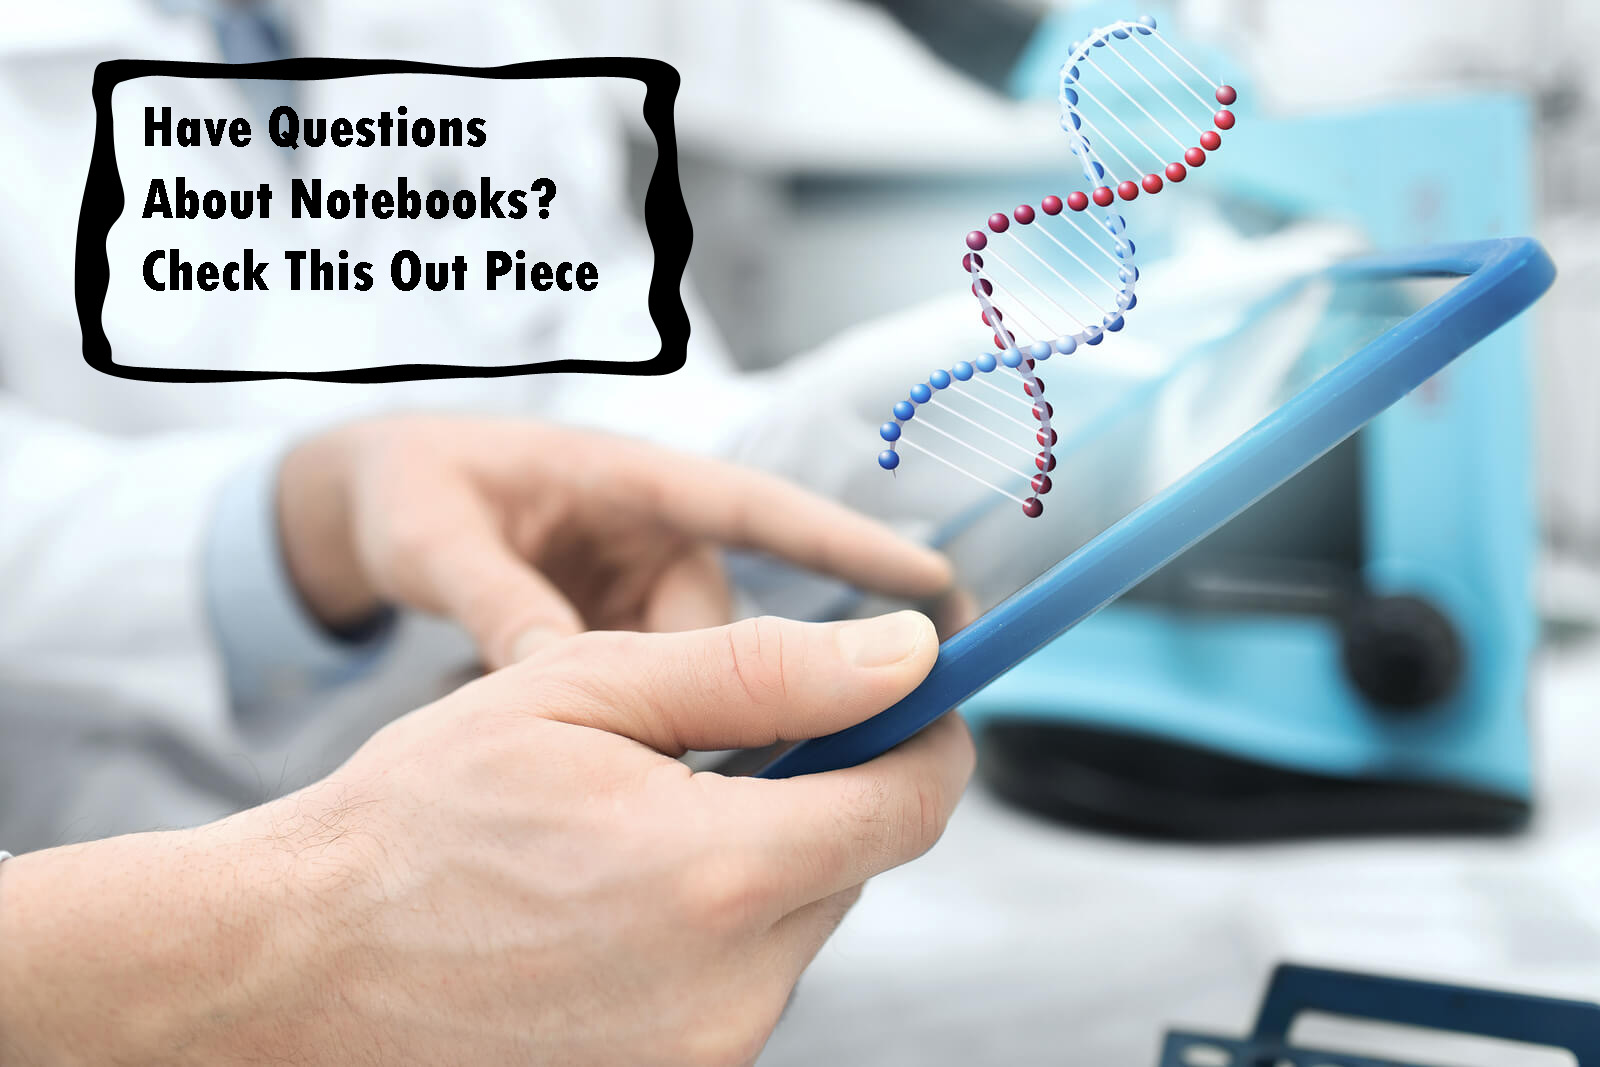 Have Questions About Notebooks? Check This Out Piece